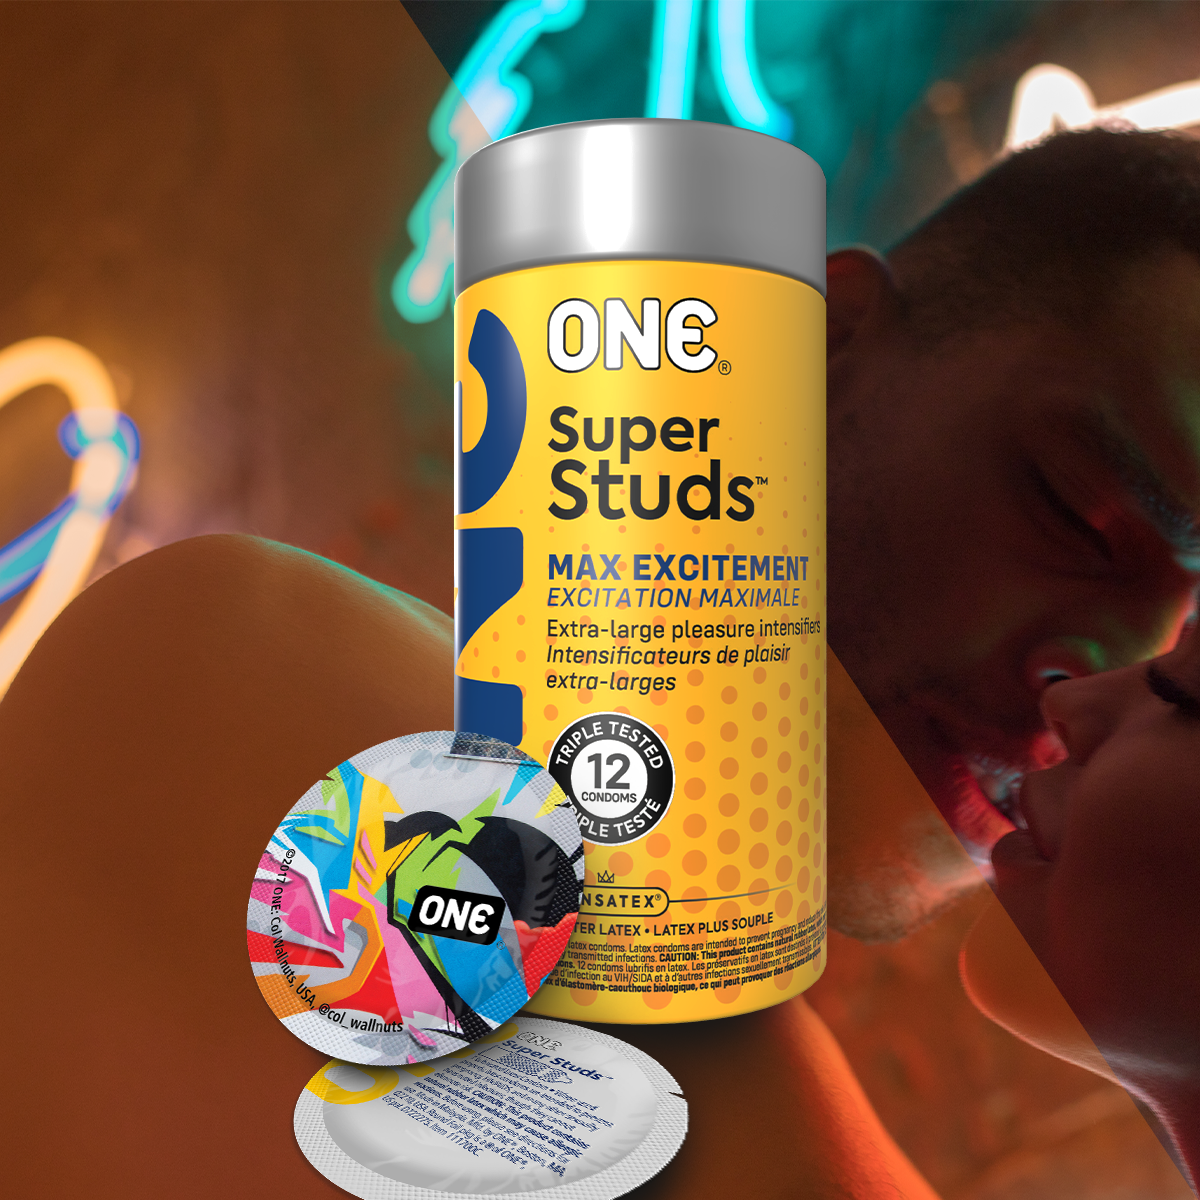 Super Studs Condoms over a background of two people about to kiss.